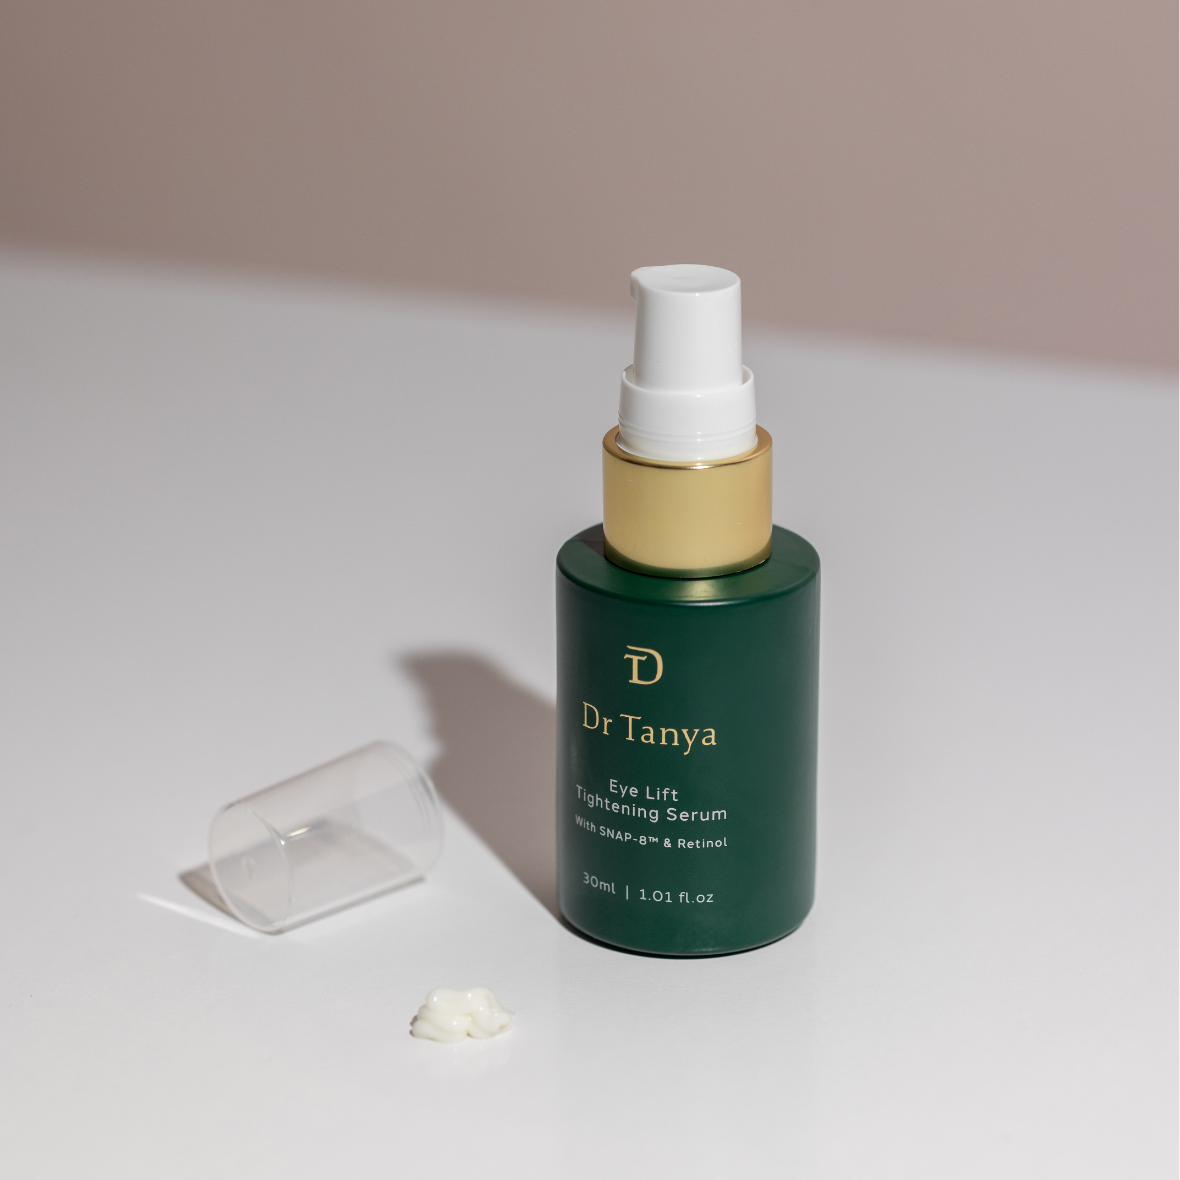 An emerald bottle of eye lift serum with the clear cap lying next to it and a drop of serum in front of it